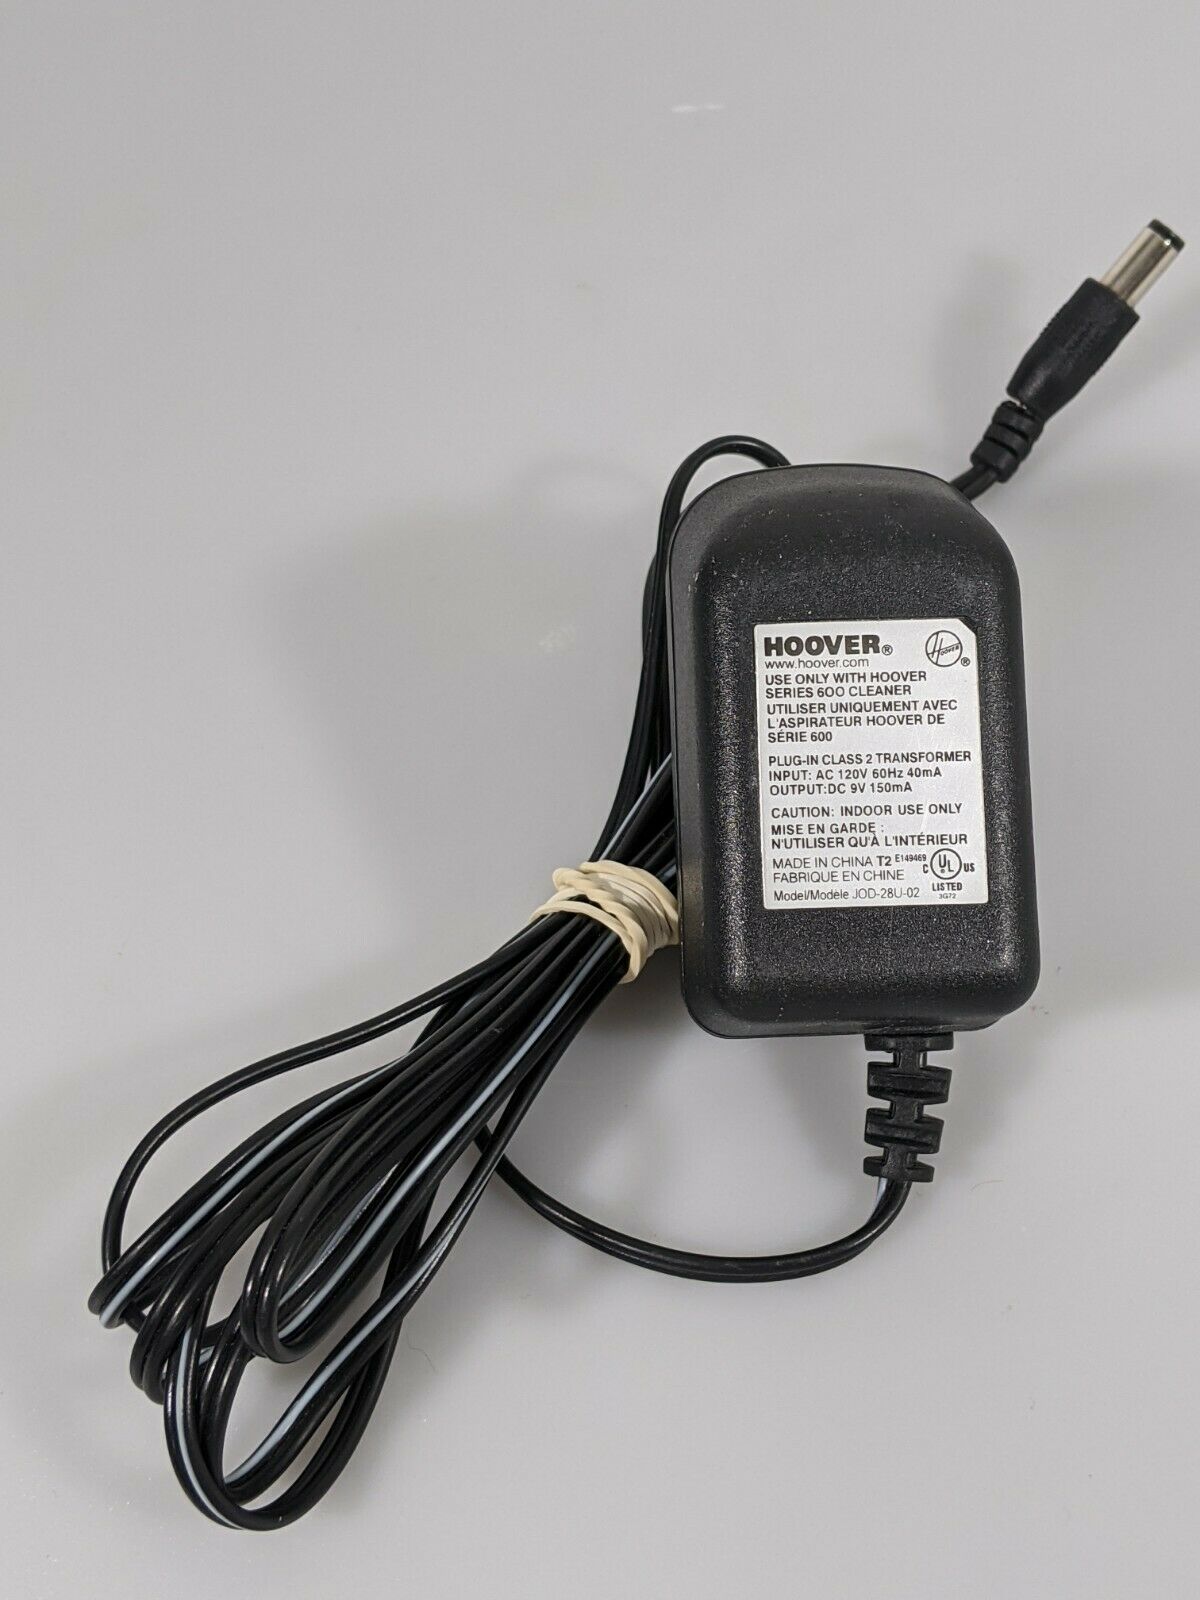 Authentic Hoover AC Adapter JOD-28U-02 For 600 Series Cleaners 9V 150mA Brand: Hoover Type: AC/DC Adapter Output Vol